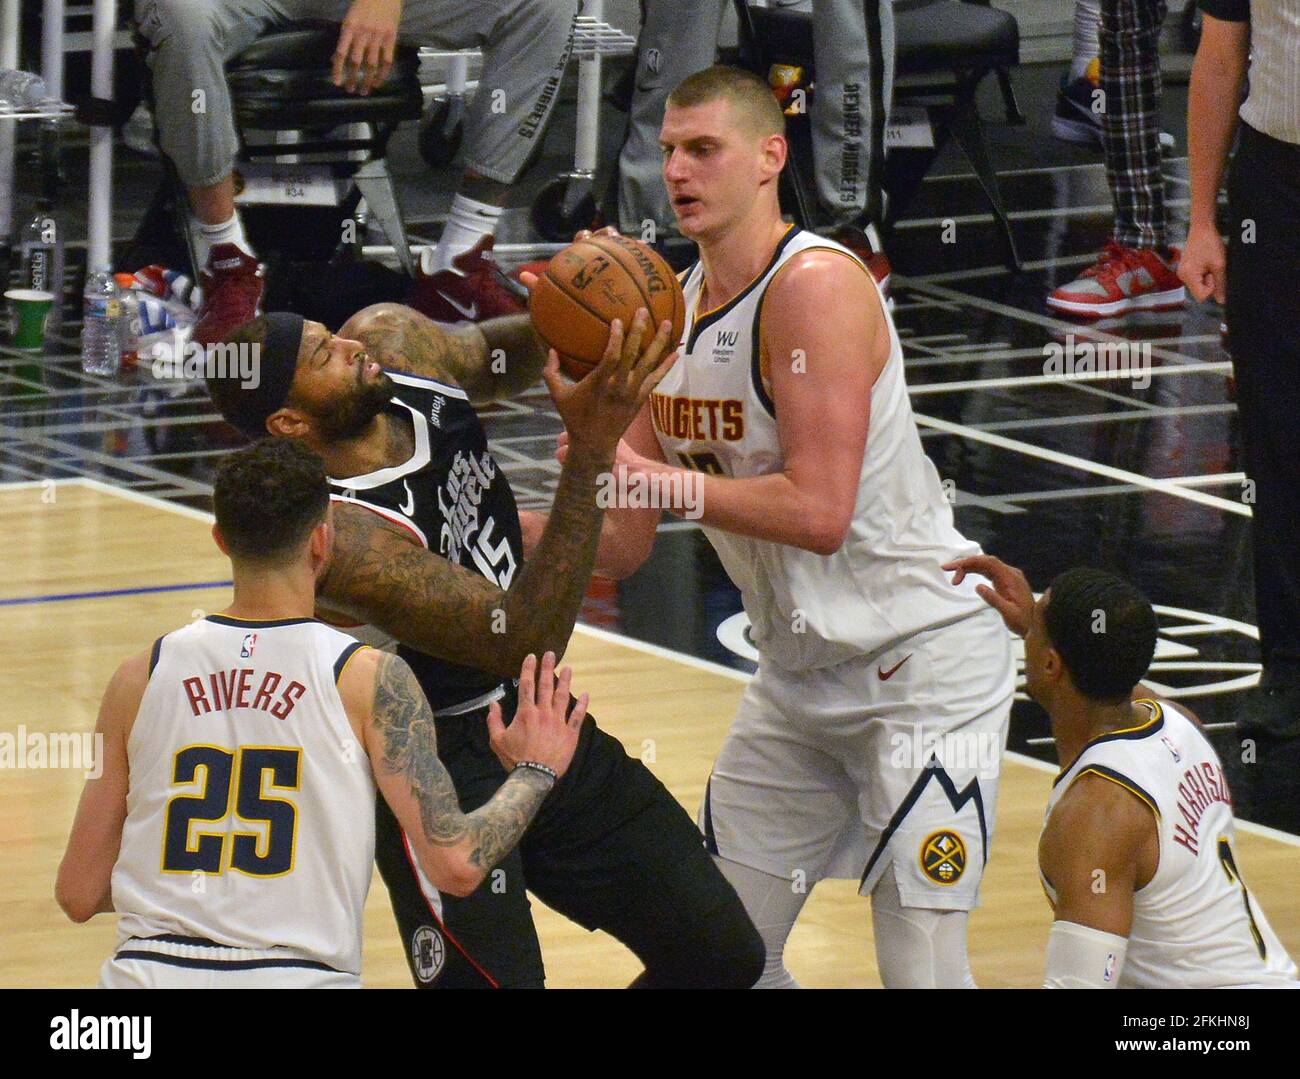 Los Angeles, United States. 02nd May, 2021. Los Angeles Clippers' center DeMarcus Cousins (15) is triple-teamed as he scores on Denver Nuggets' center Nikola Jokic (15) during the second half at Staples Center in Los Angeles on Saturday, May 1, 2021. The Nuggets defeated the Clippers 110-104. Photo by Jim Ruymen/UPI Credit: UPI/Alamy Live News Stock Photo